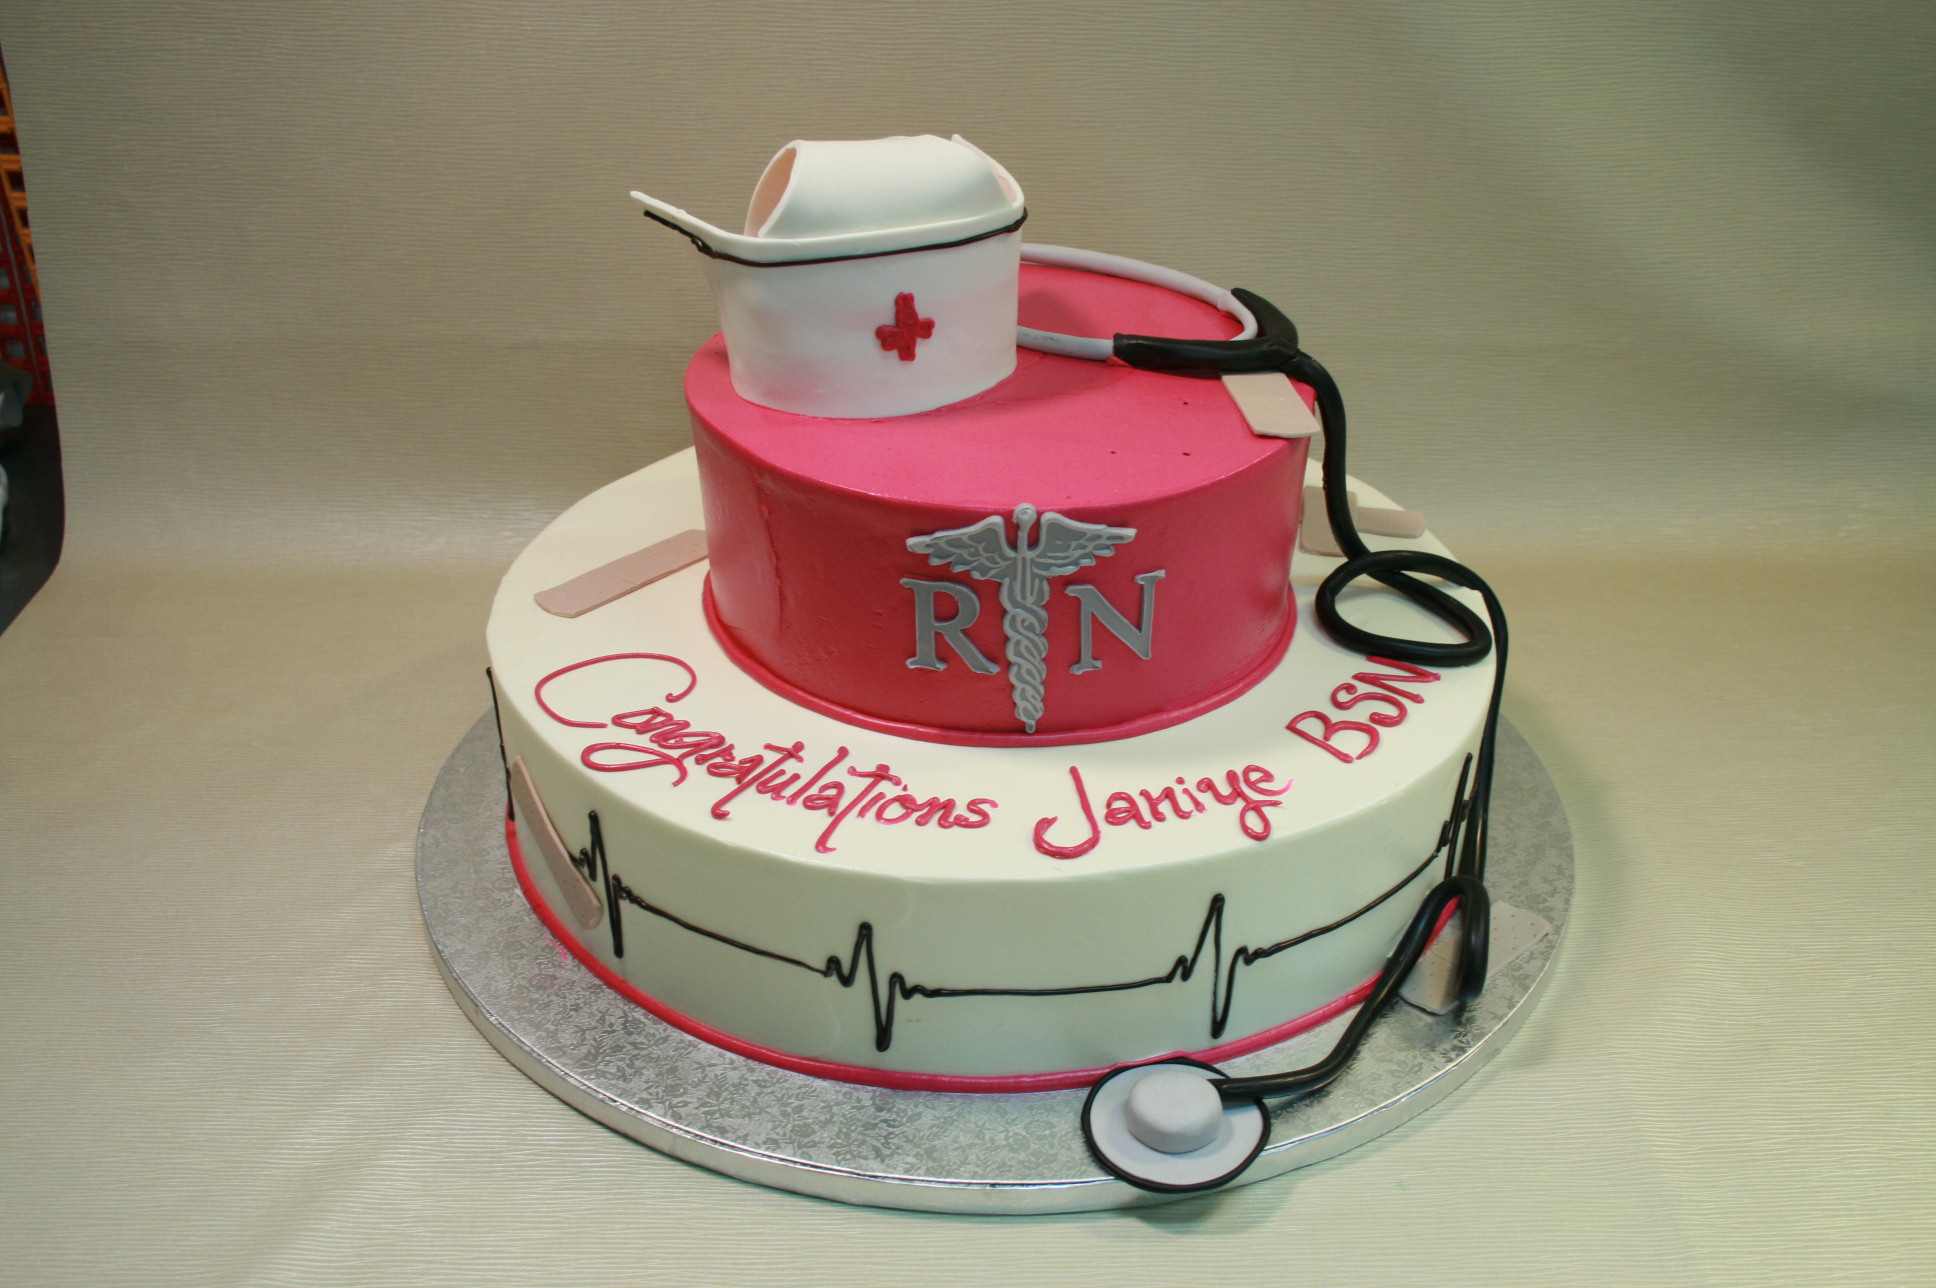 A Perfect Cake for a Student Nurse | New York Cake Co.